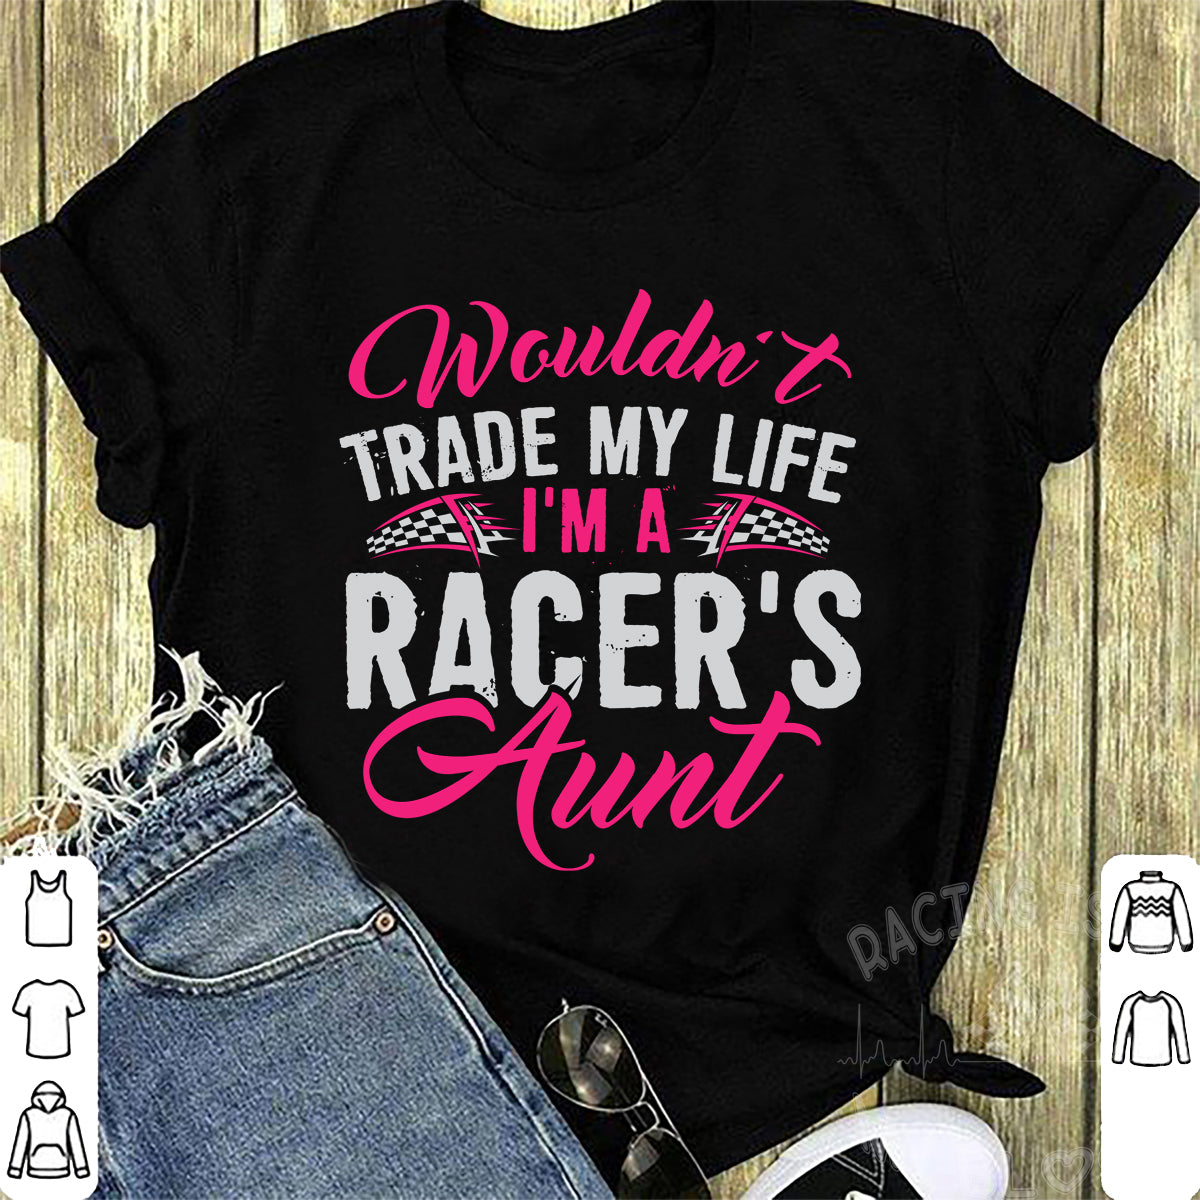 Wouldn't Trade My Life I'm A Racer's Aunt T-Shirts!